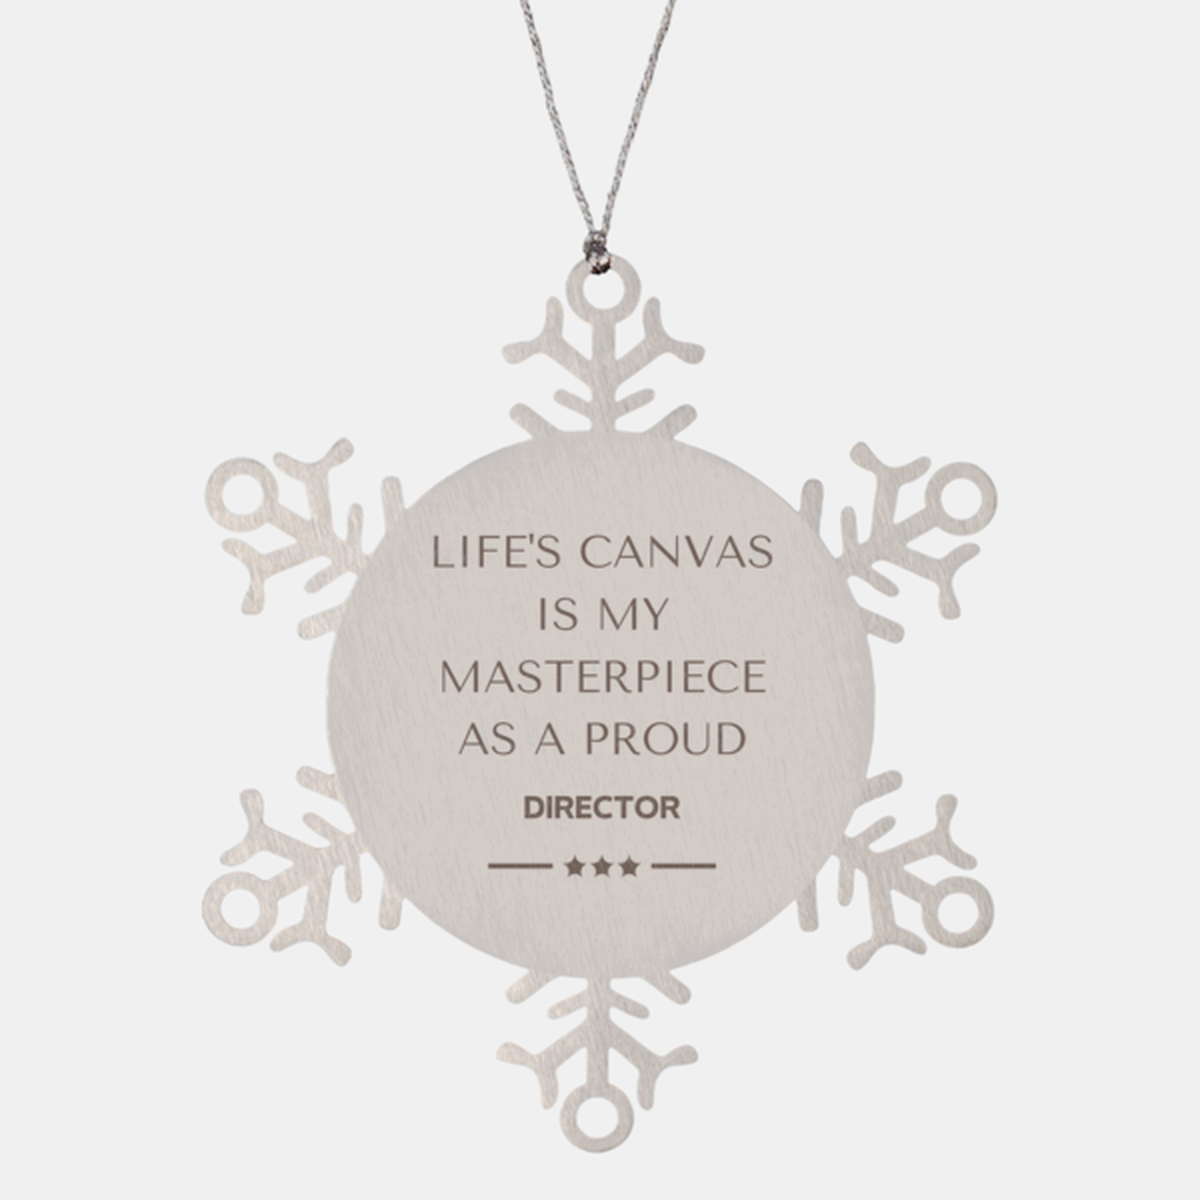 Proud Director Gifts, Life's canvas is my masterpiece, Epic Birthday Christmas Unique Snowflake Ornament For Director, Coworkers, Men, Women, Friends